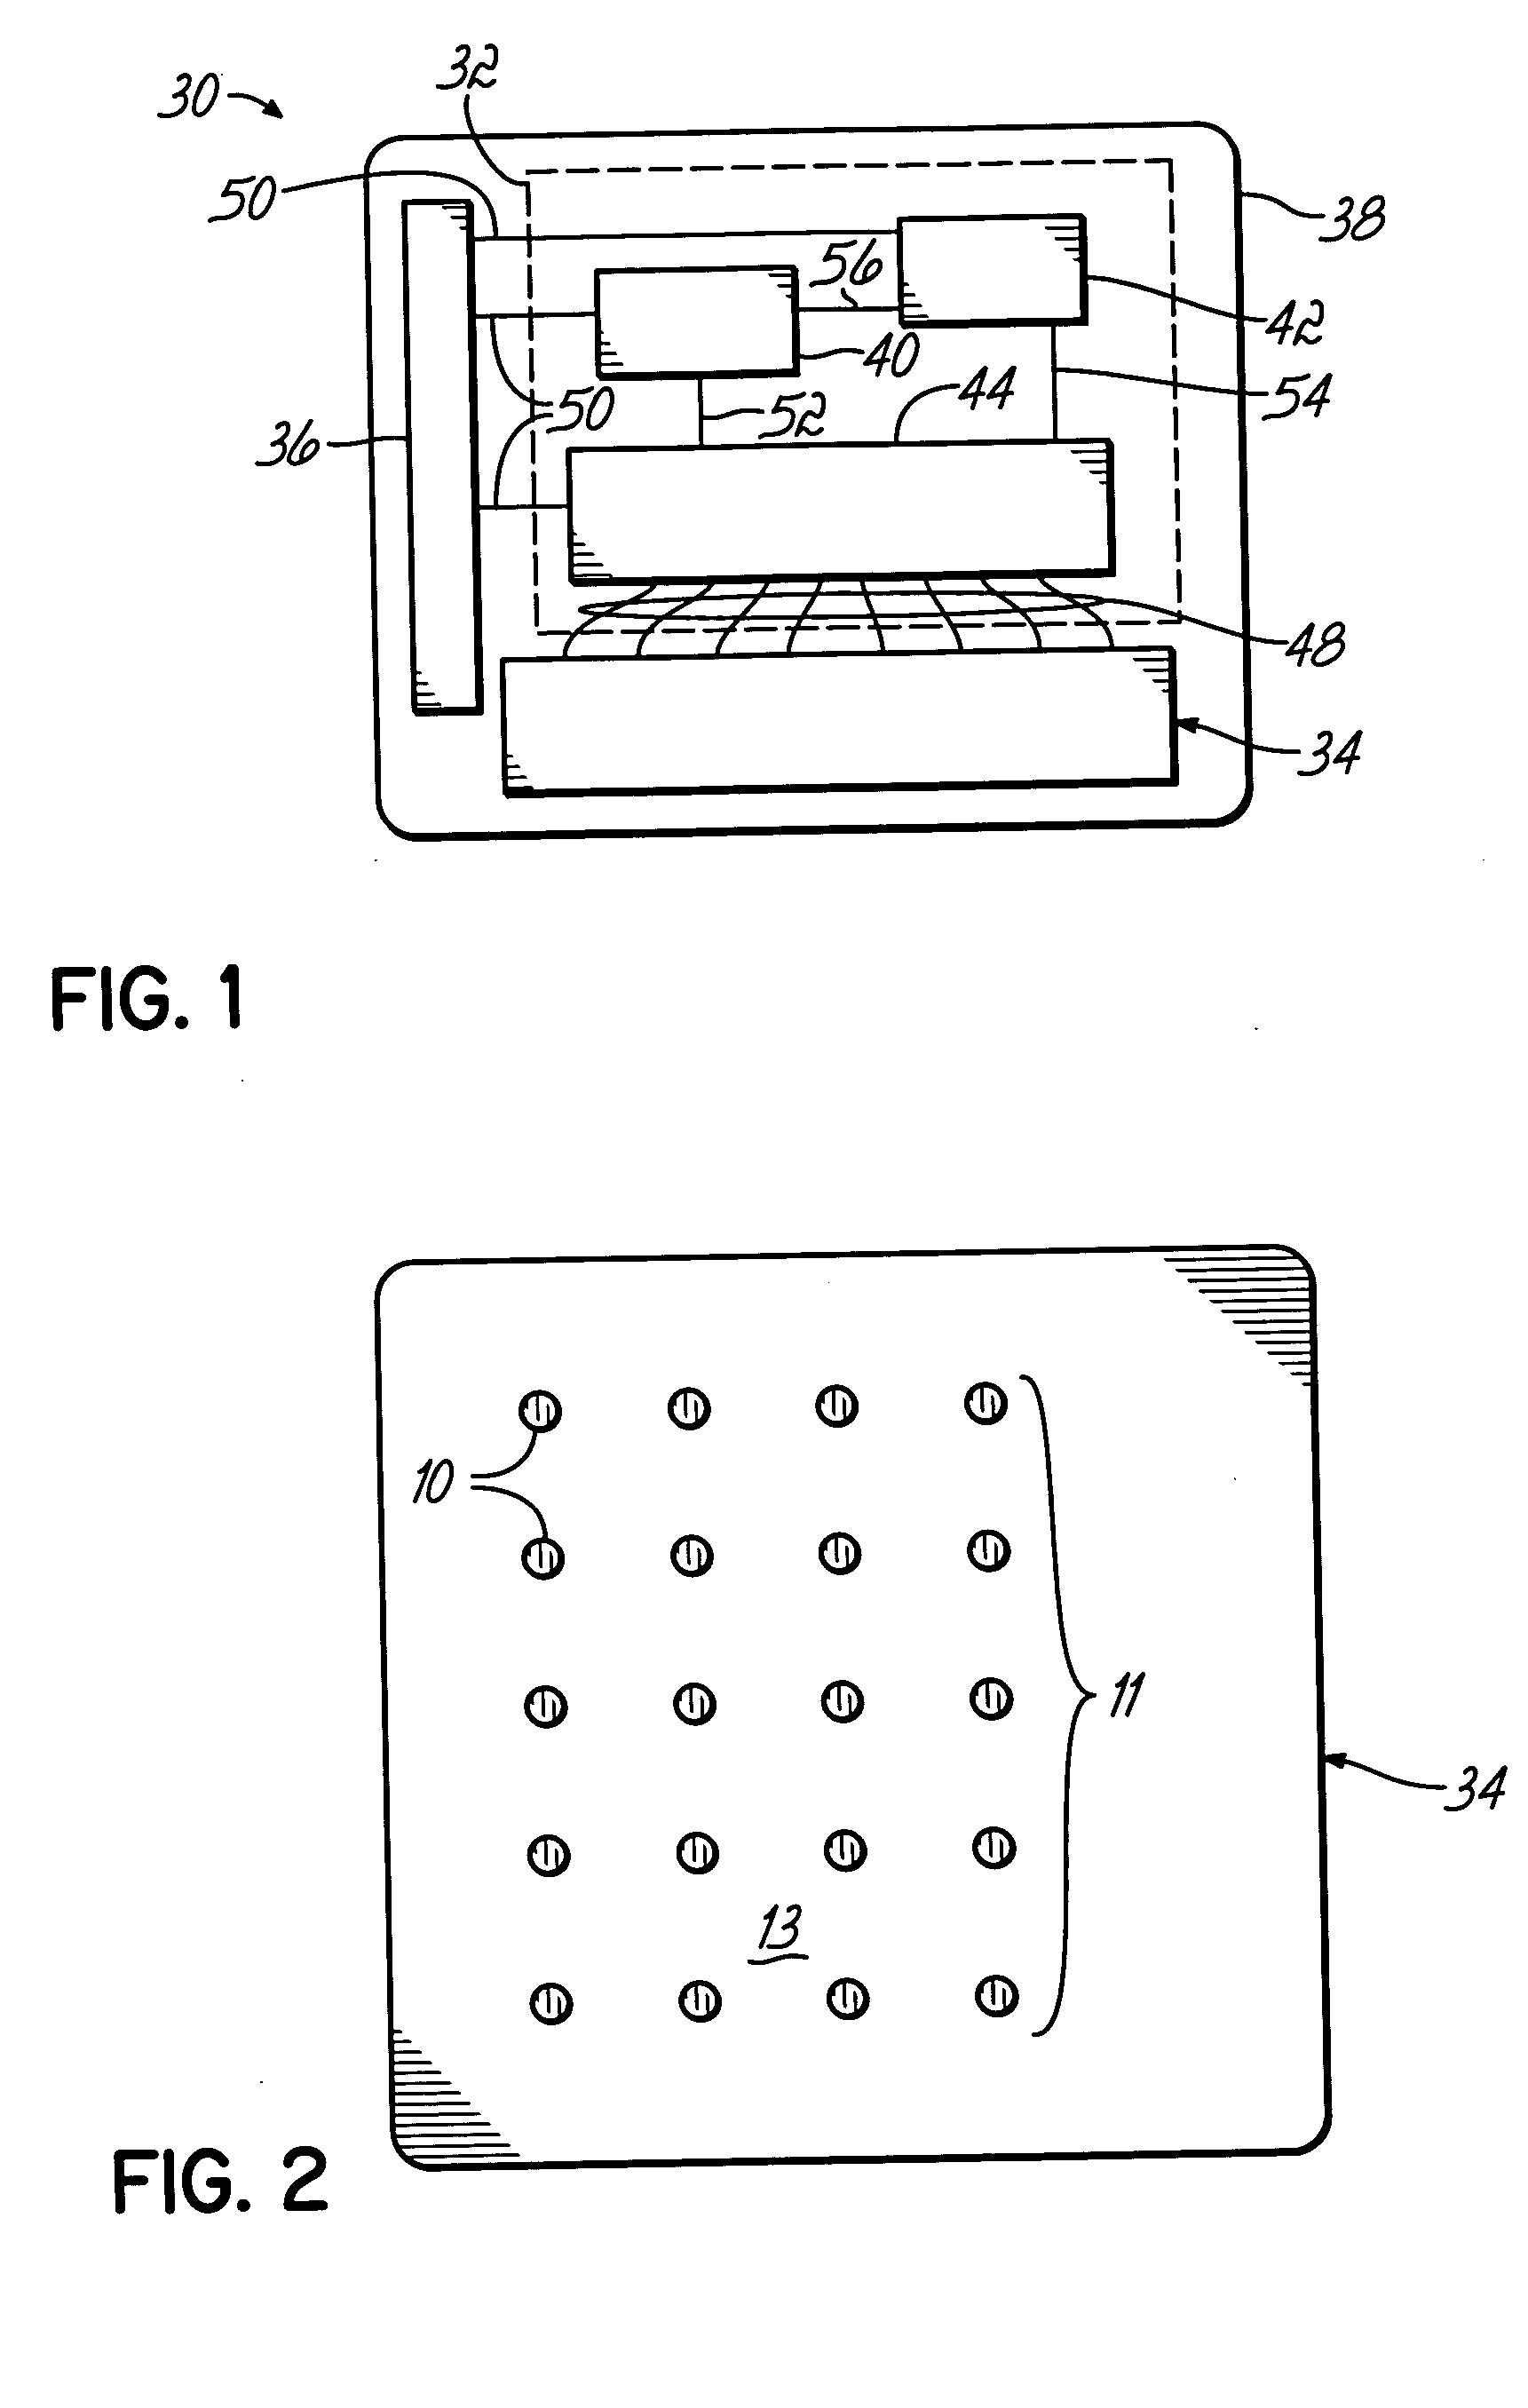 Device and method for producing a three-dimensionally perceived planar tactile illusion